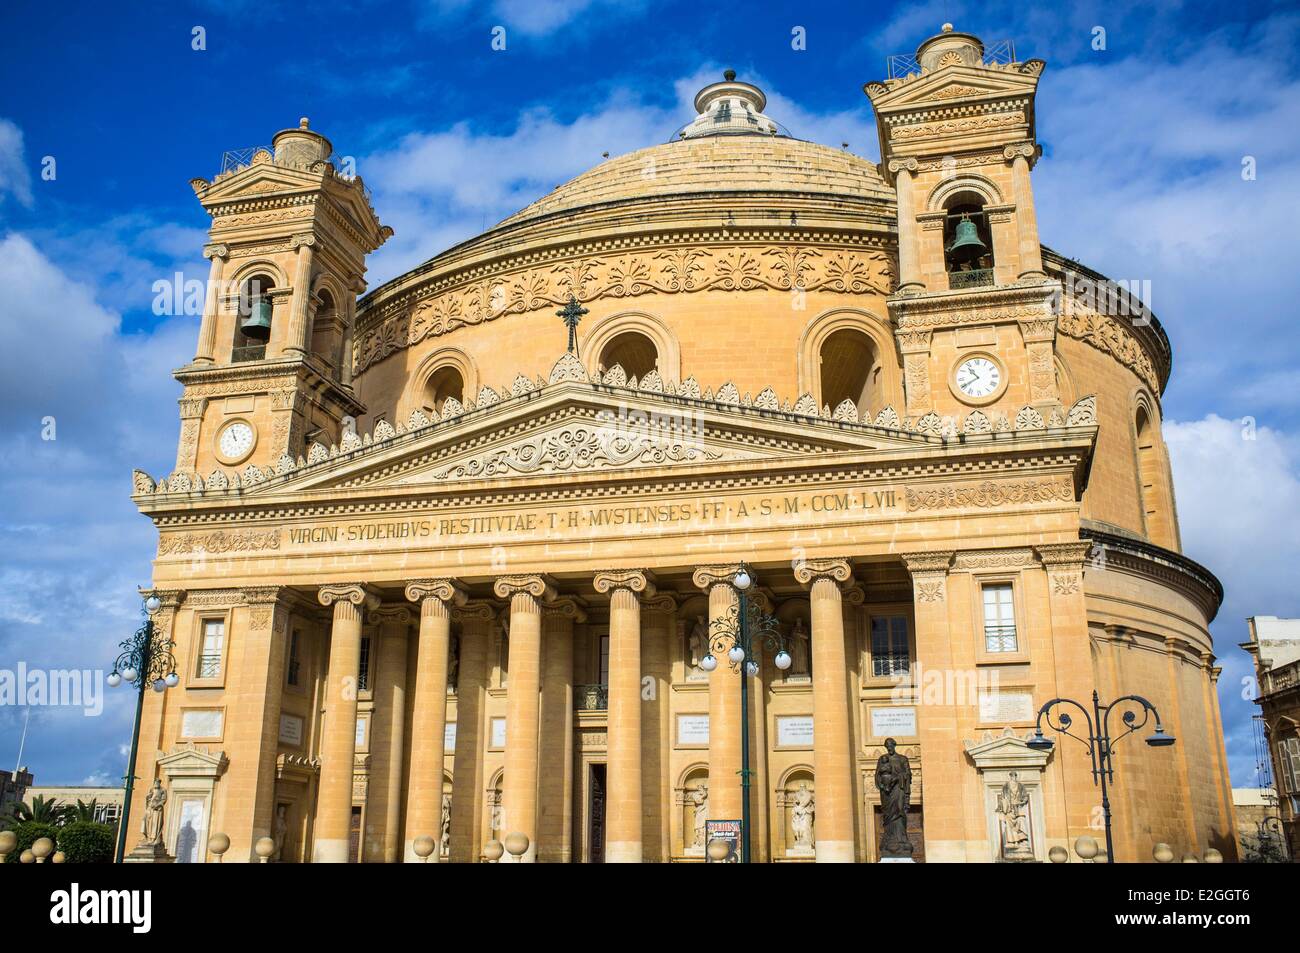 Malta Mosta famous for church Rotunda of St Marija Assunta with one of largest unsupported dome in world Stock Photo